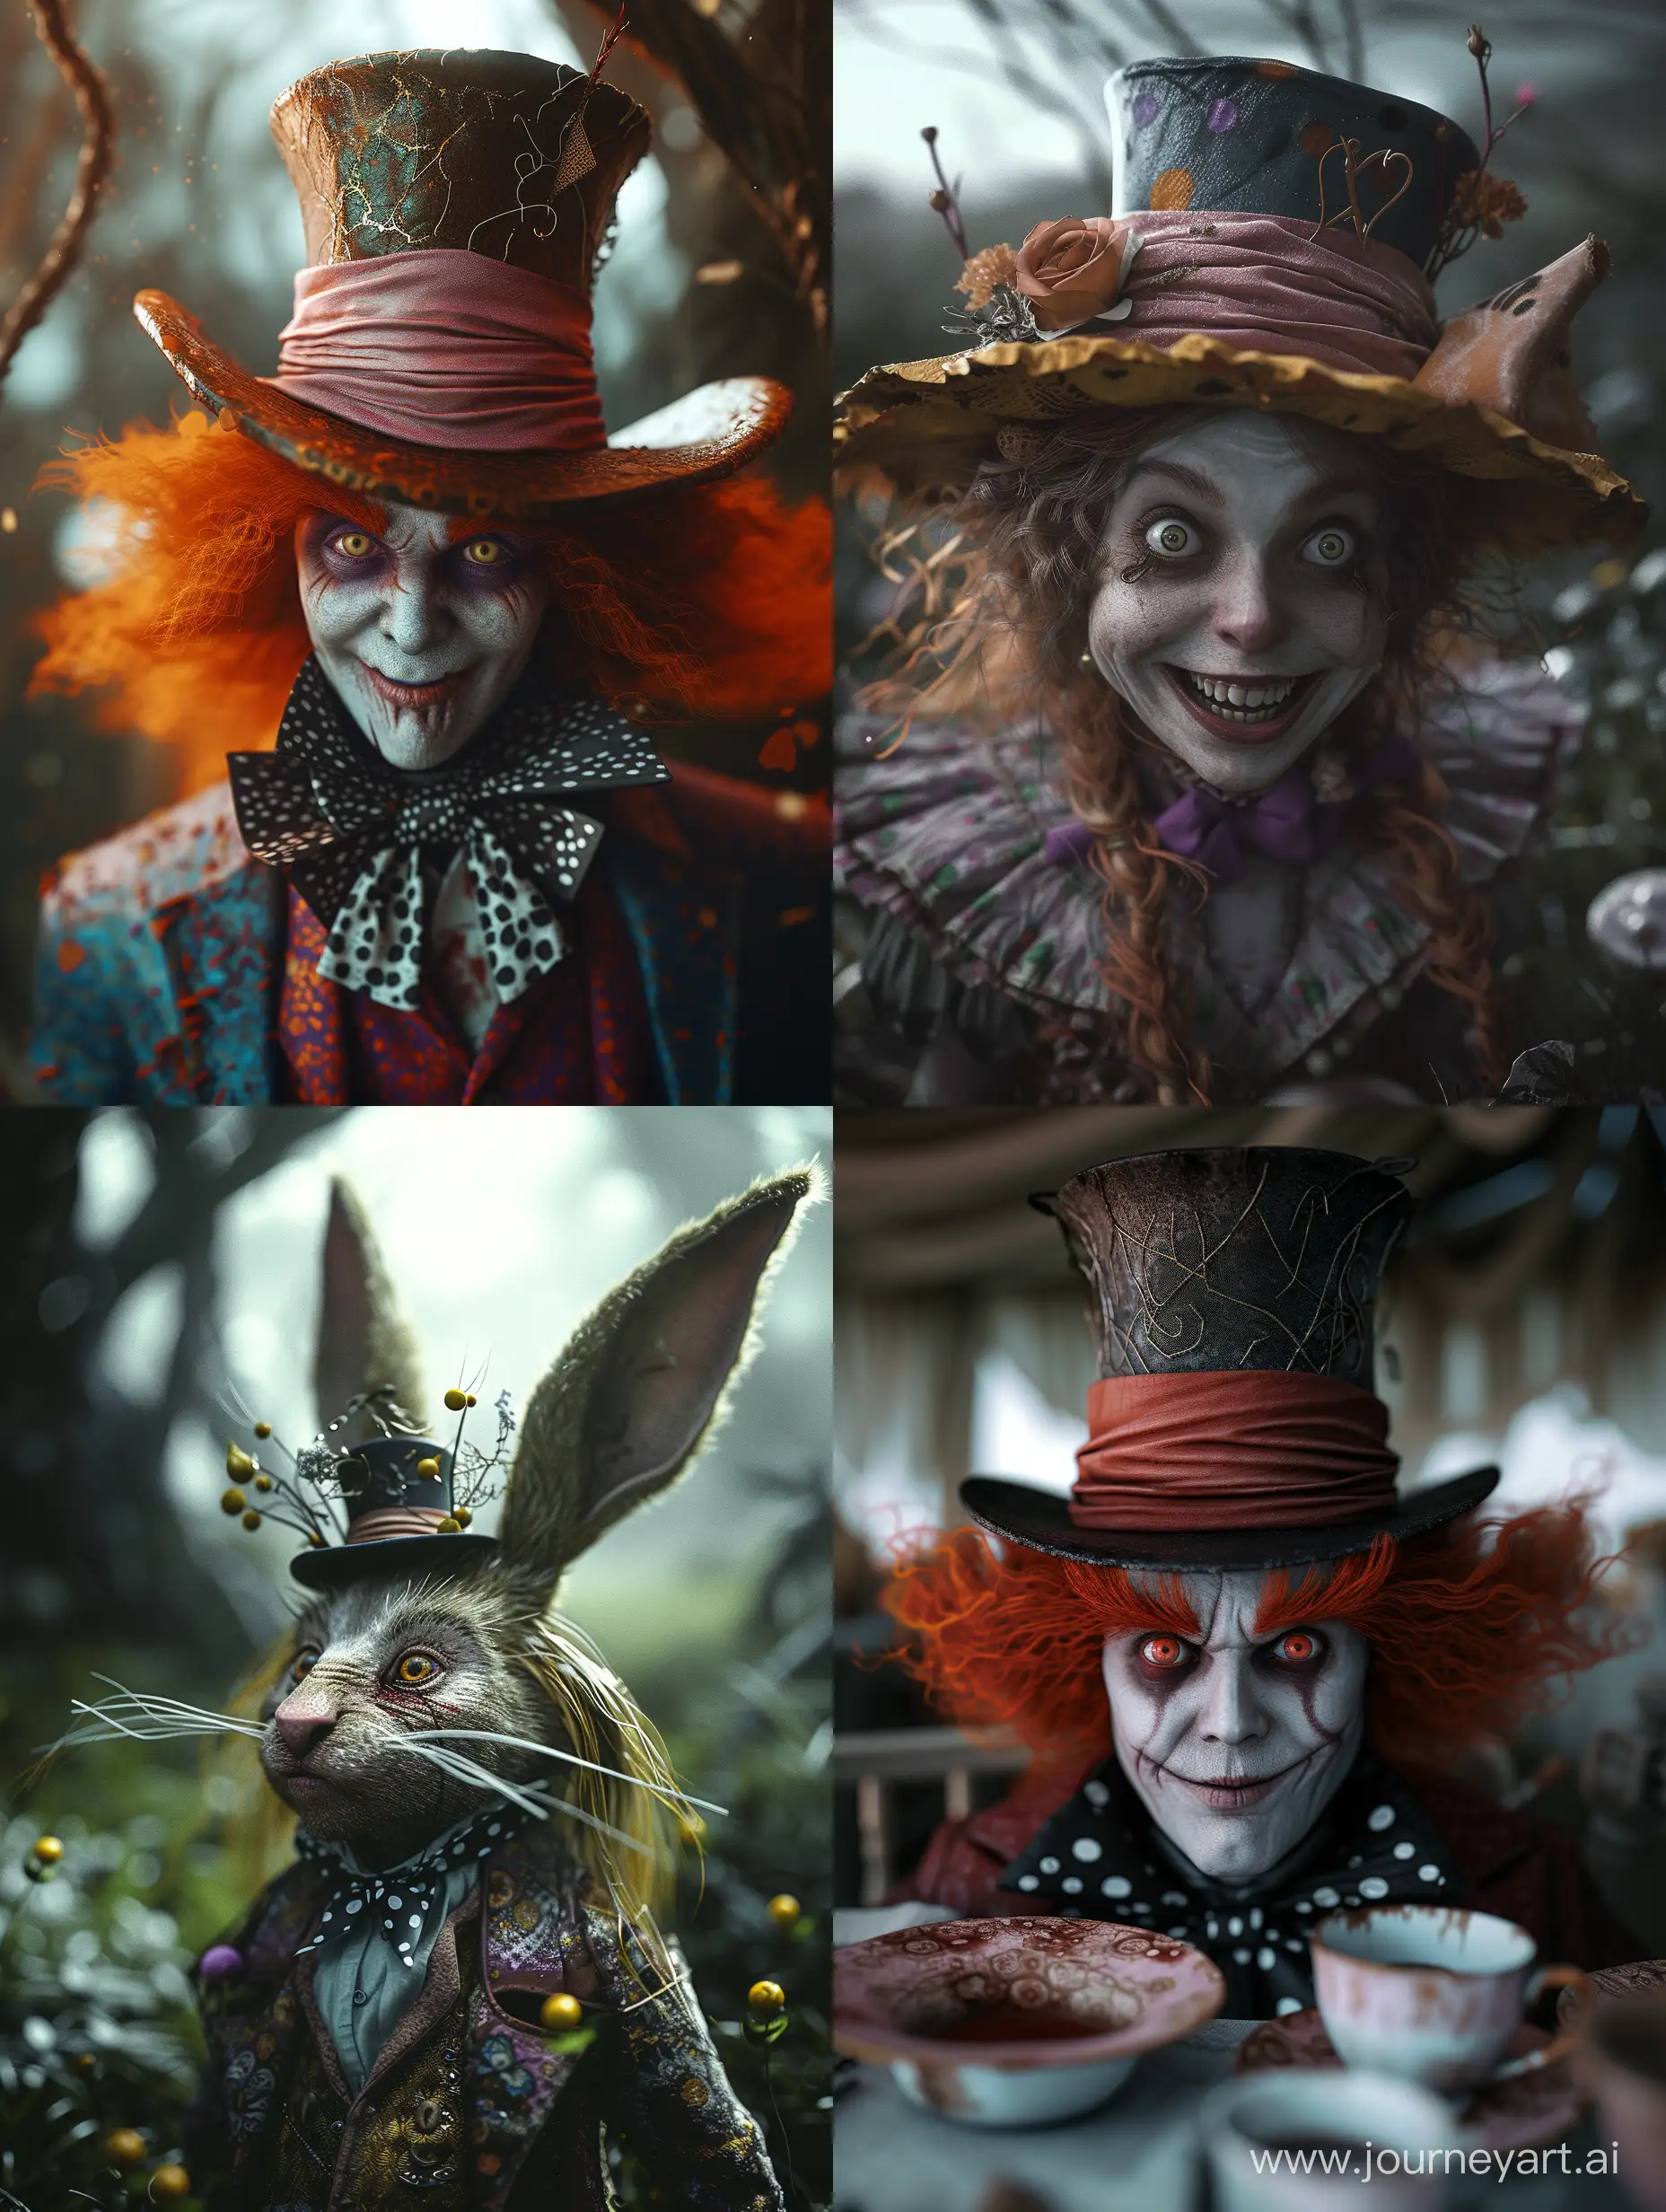 Alice in wonderland | mad hatter | unhinged | psychotic | epic cinematography | full frame | atmospheric I deep depth of field | attention to detail | nightmare fuel | horror core | creepypasta | 3D digital photoillustration | ambient occlusion | taken on provia